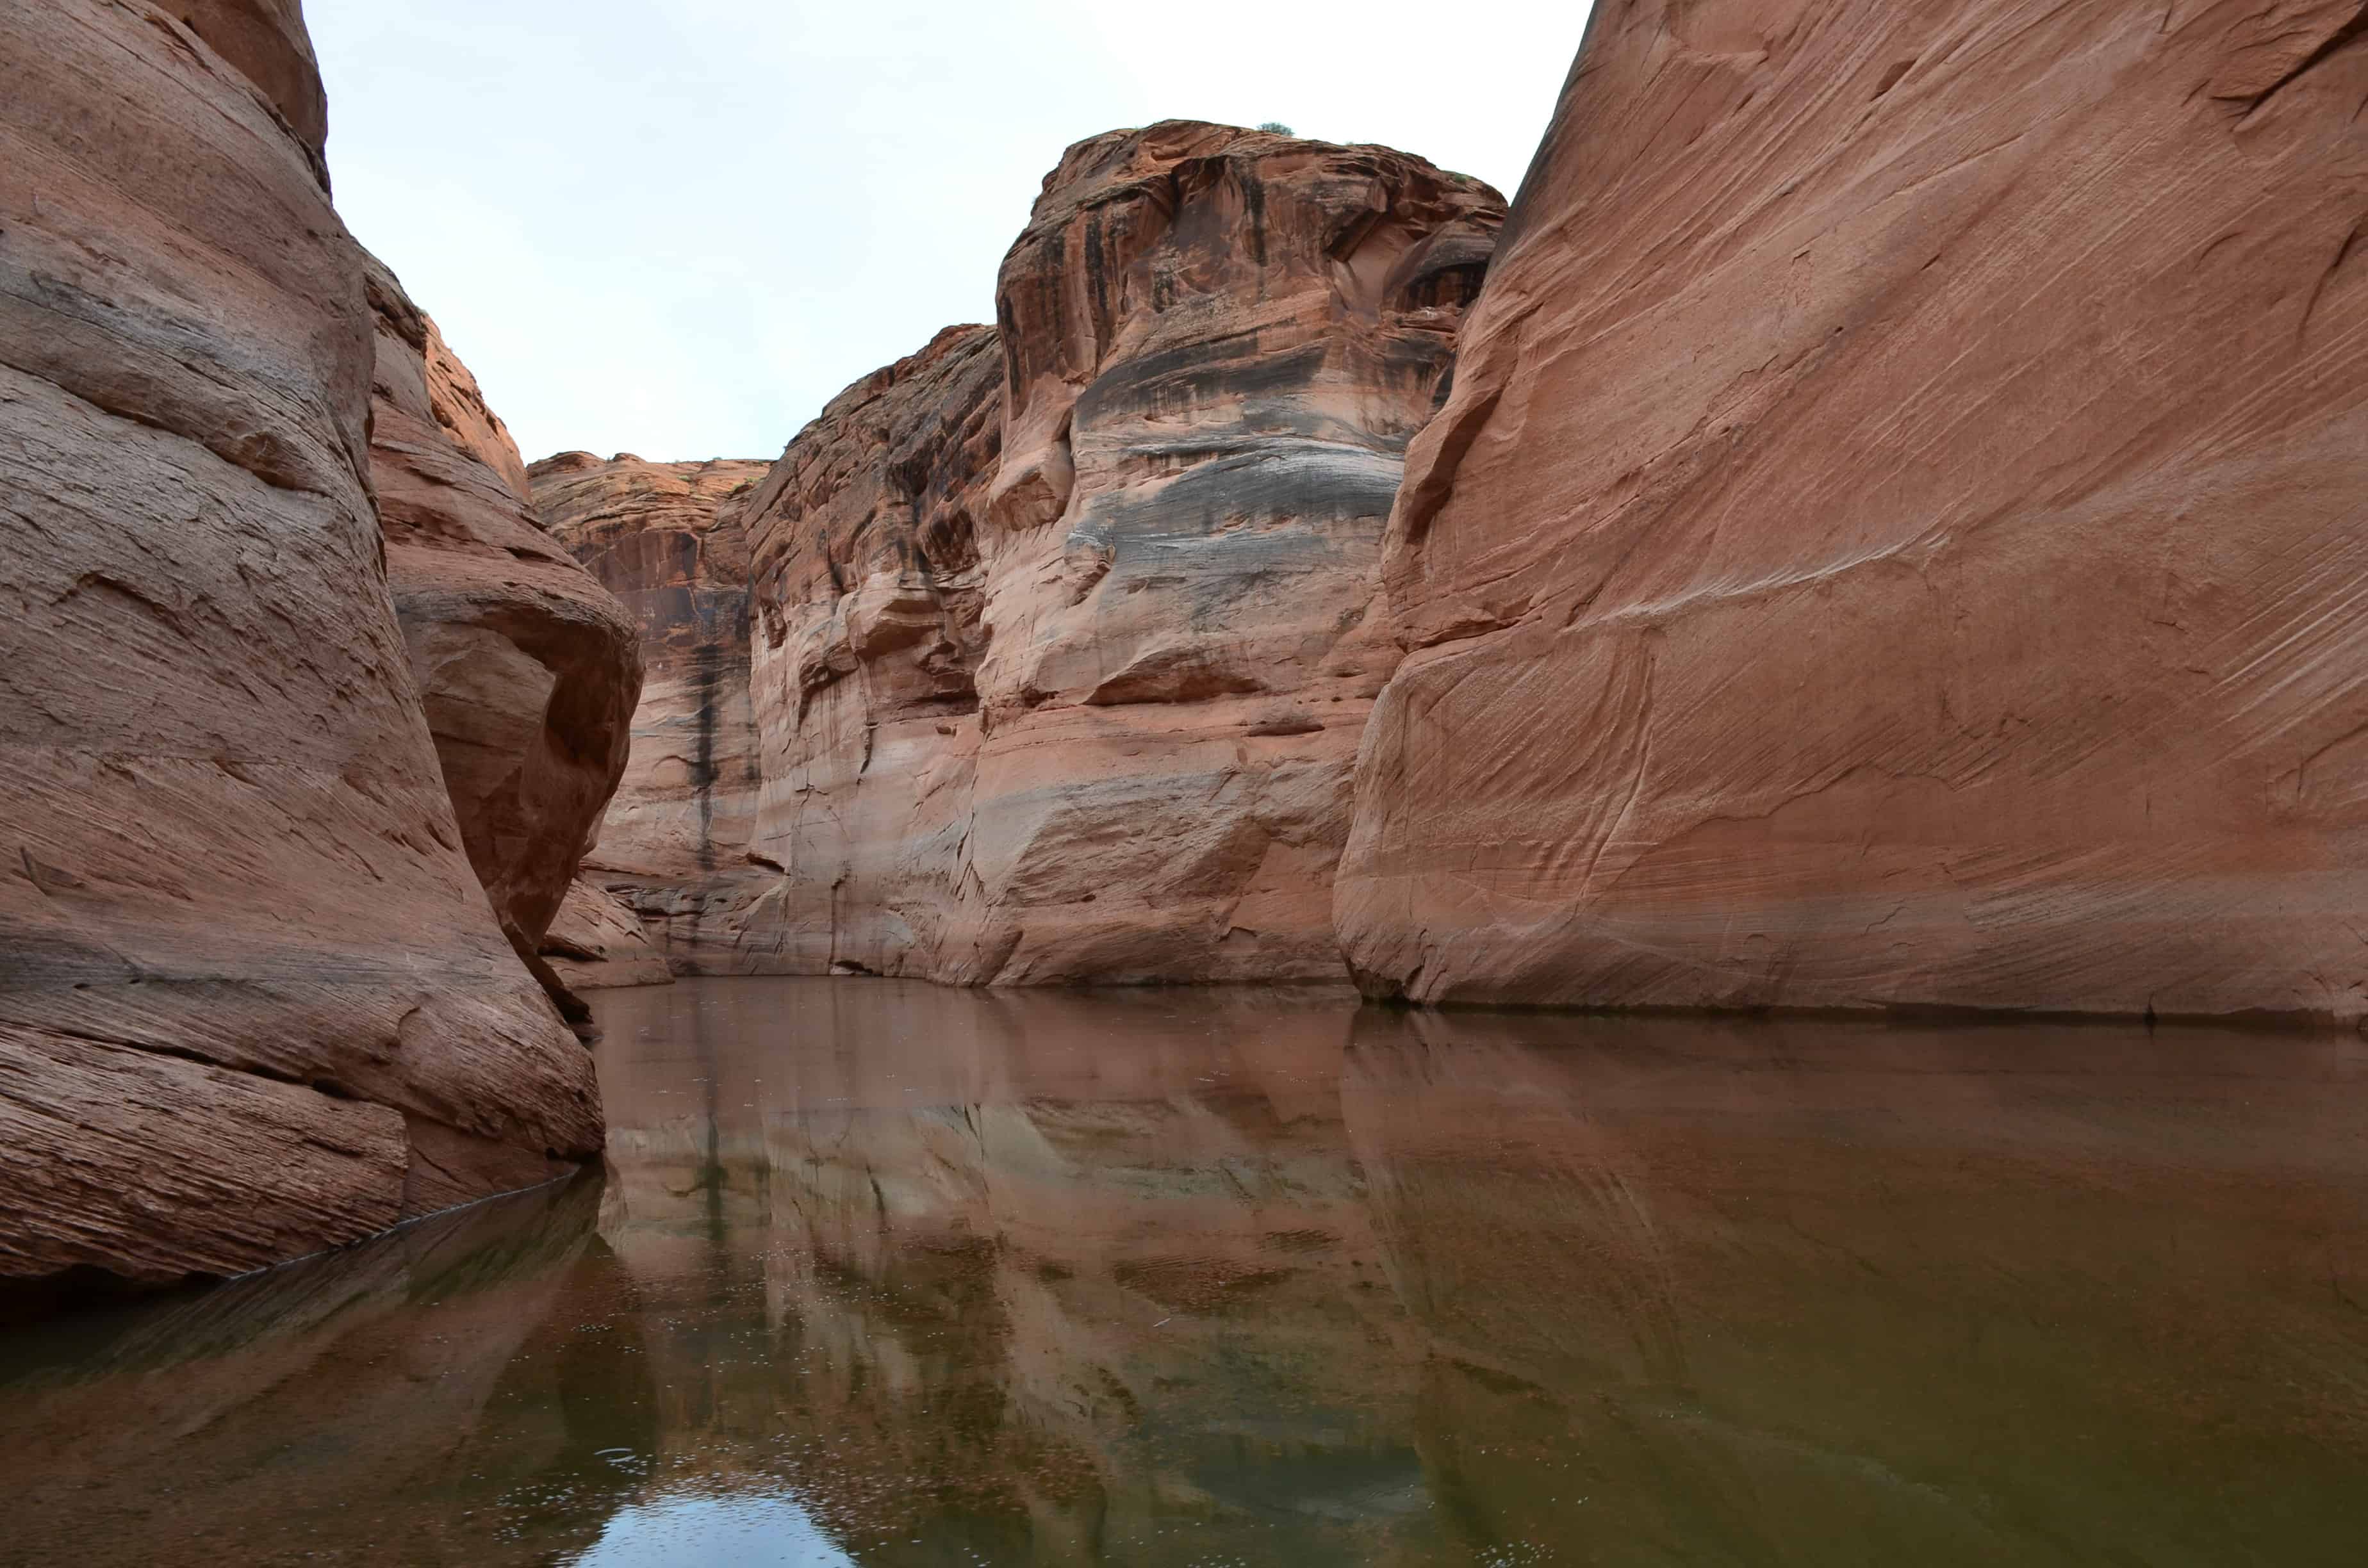 Near the water's end at Antelope Canyon on Lake Powell at Glen Canyon National Recreation Area in Arizona